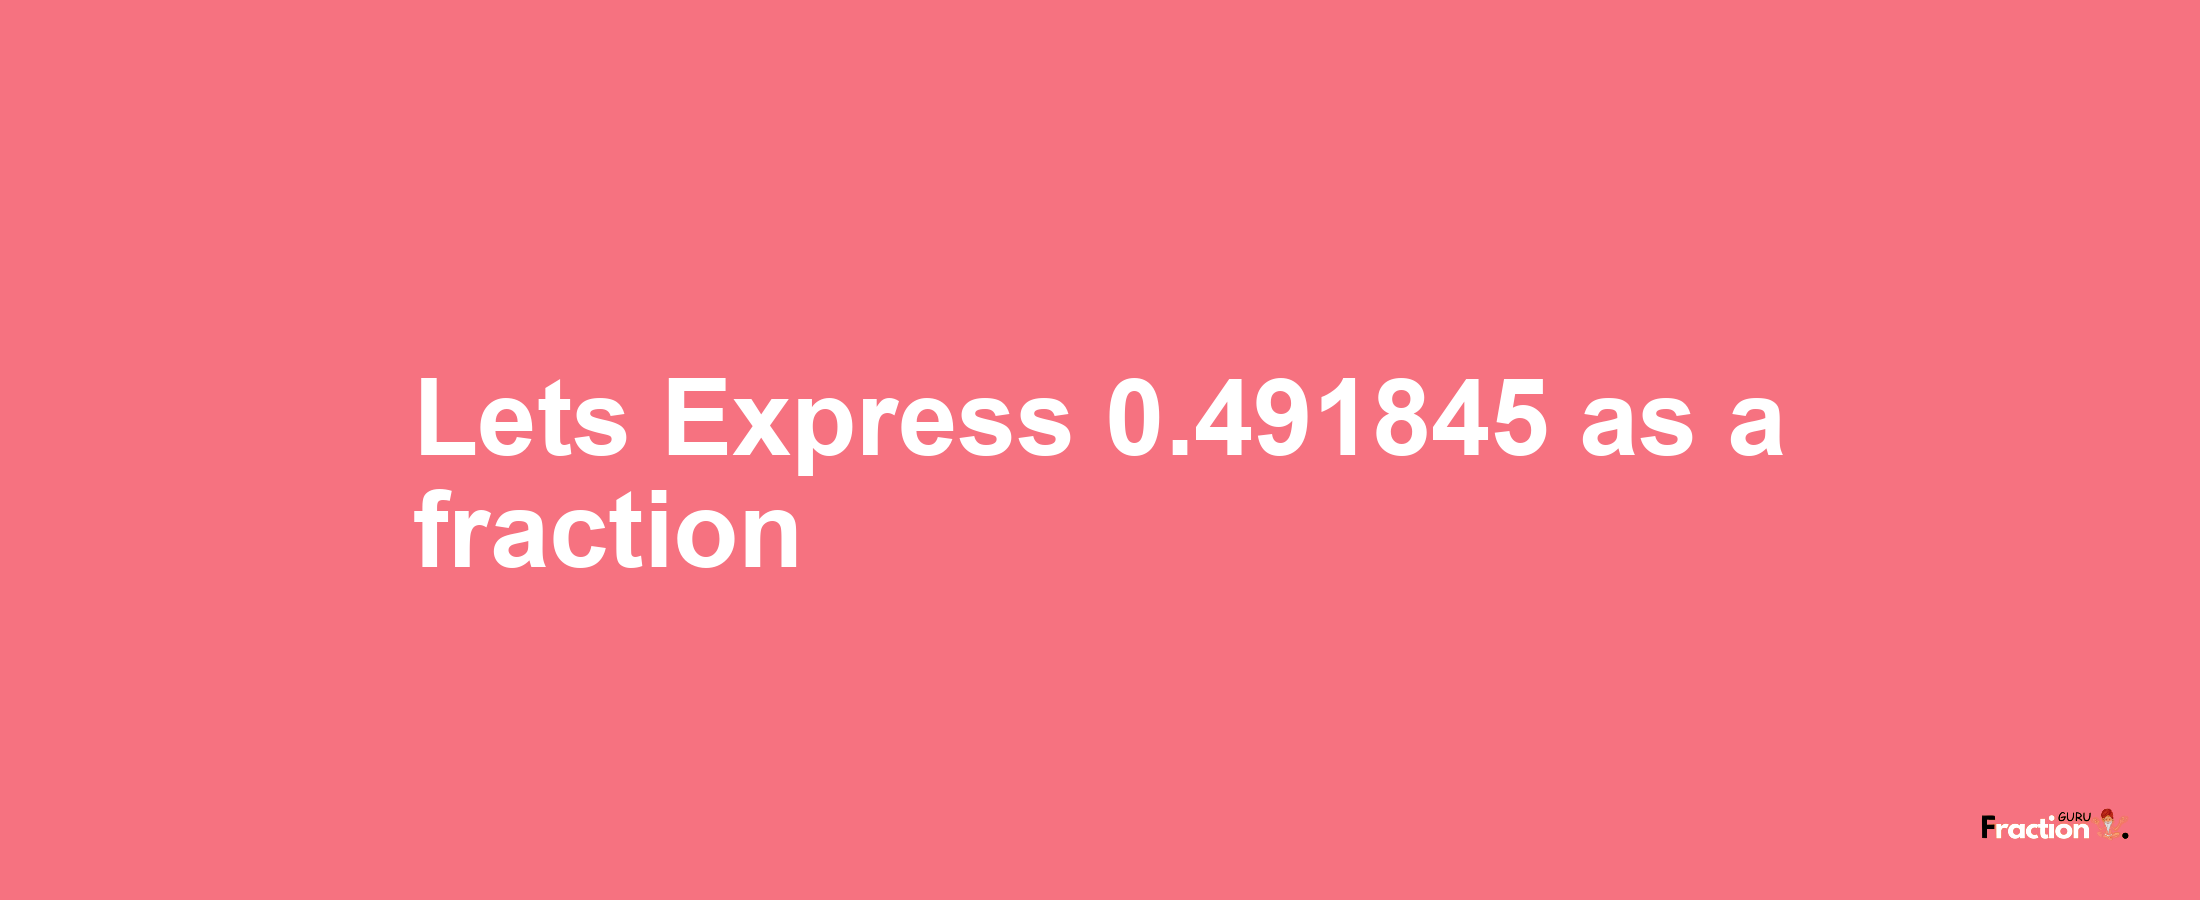 Lets Express 0.491845 as afraction